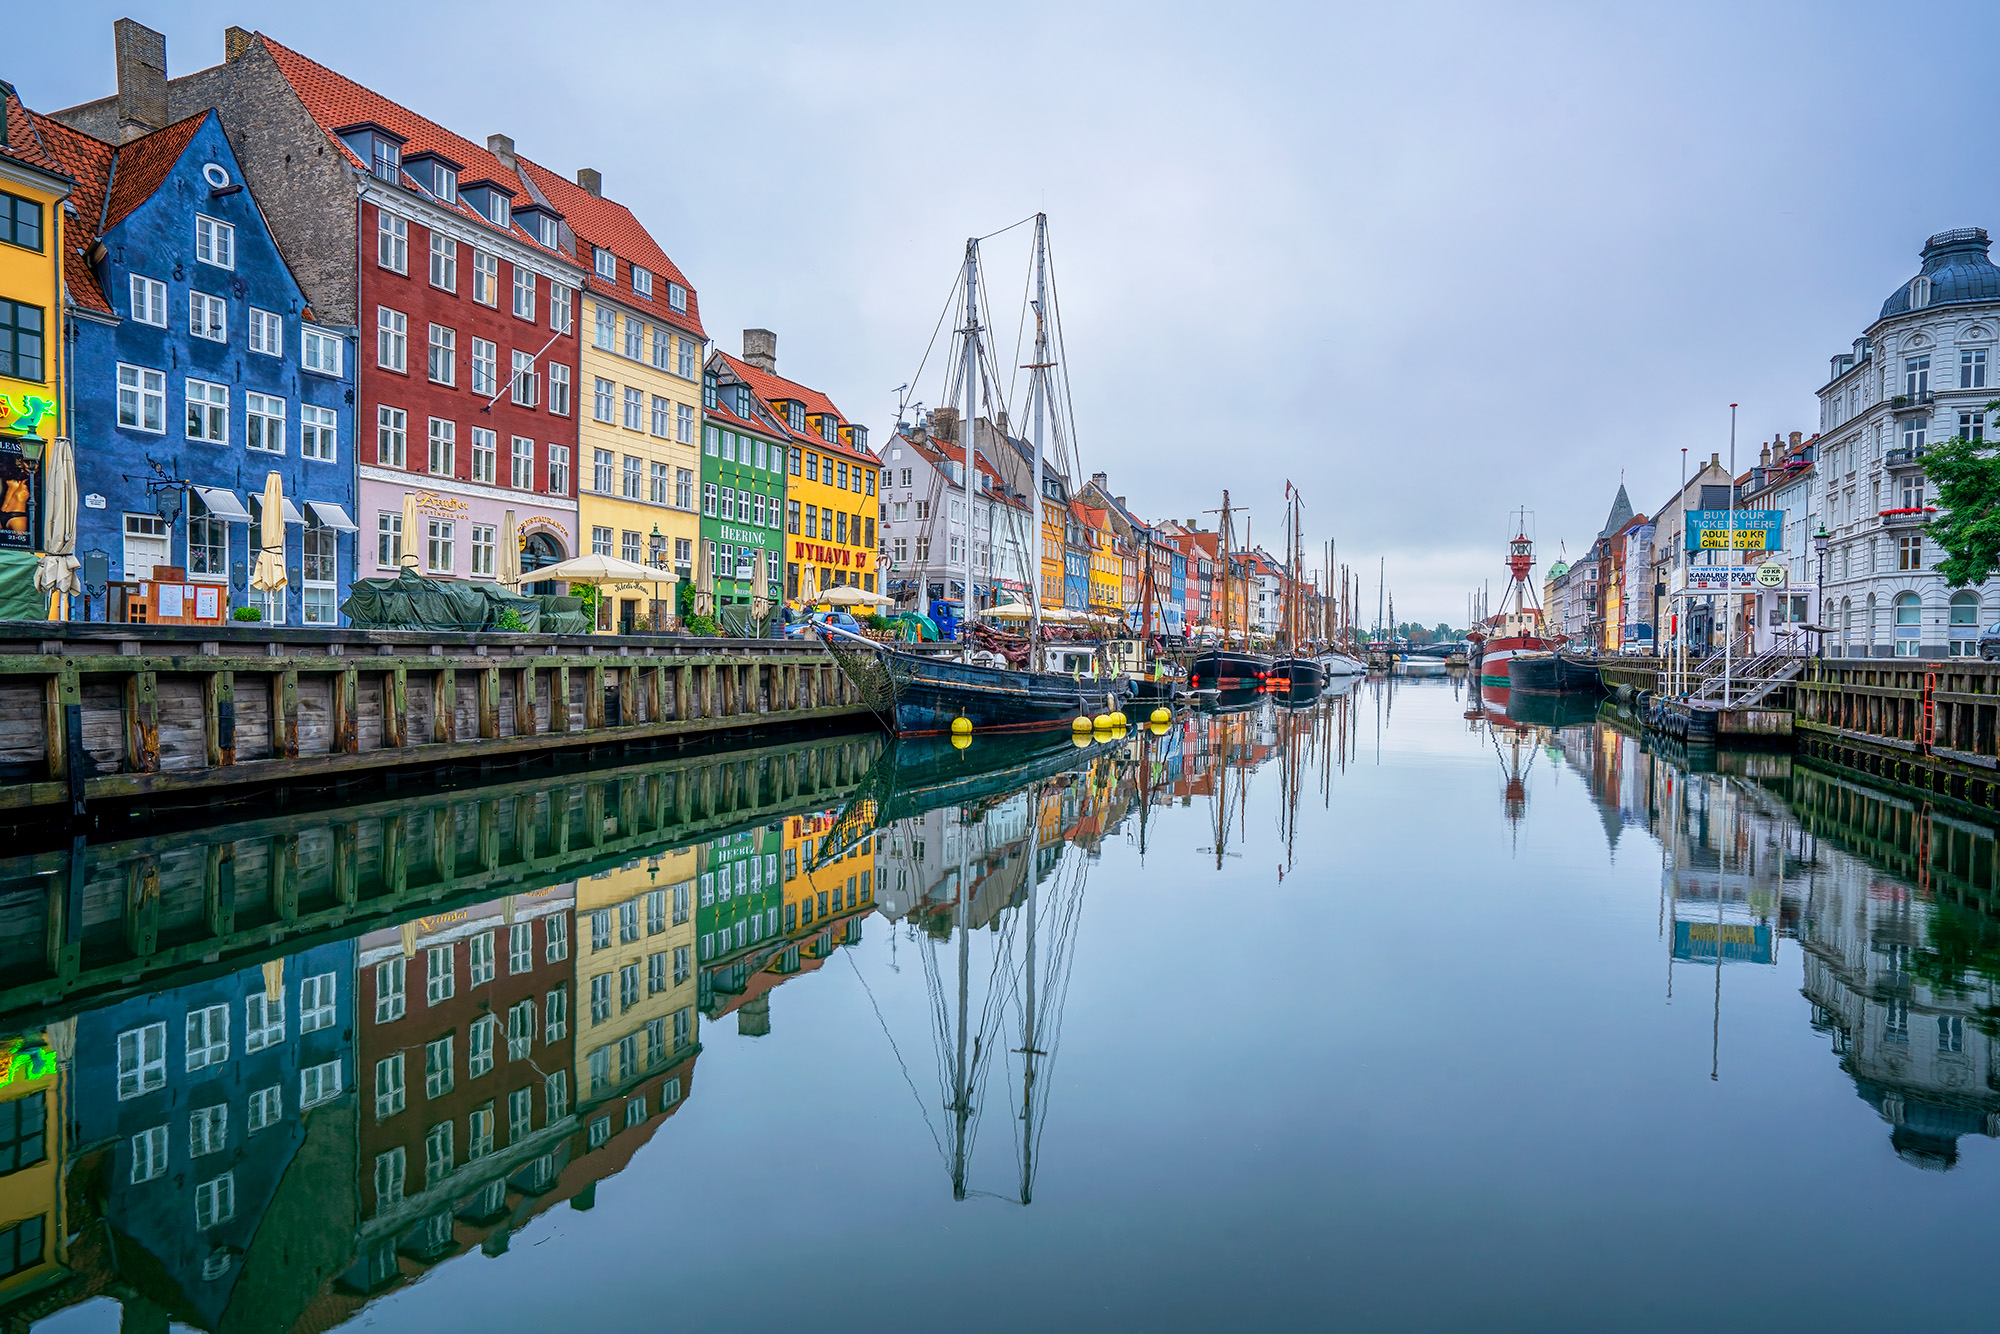 As I captured a photo in the Nyhaven area of Copenhagen, Denmark, I was impressed by the vibrant display of colors and reflections...